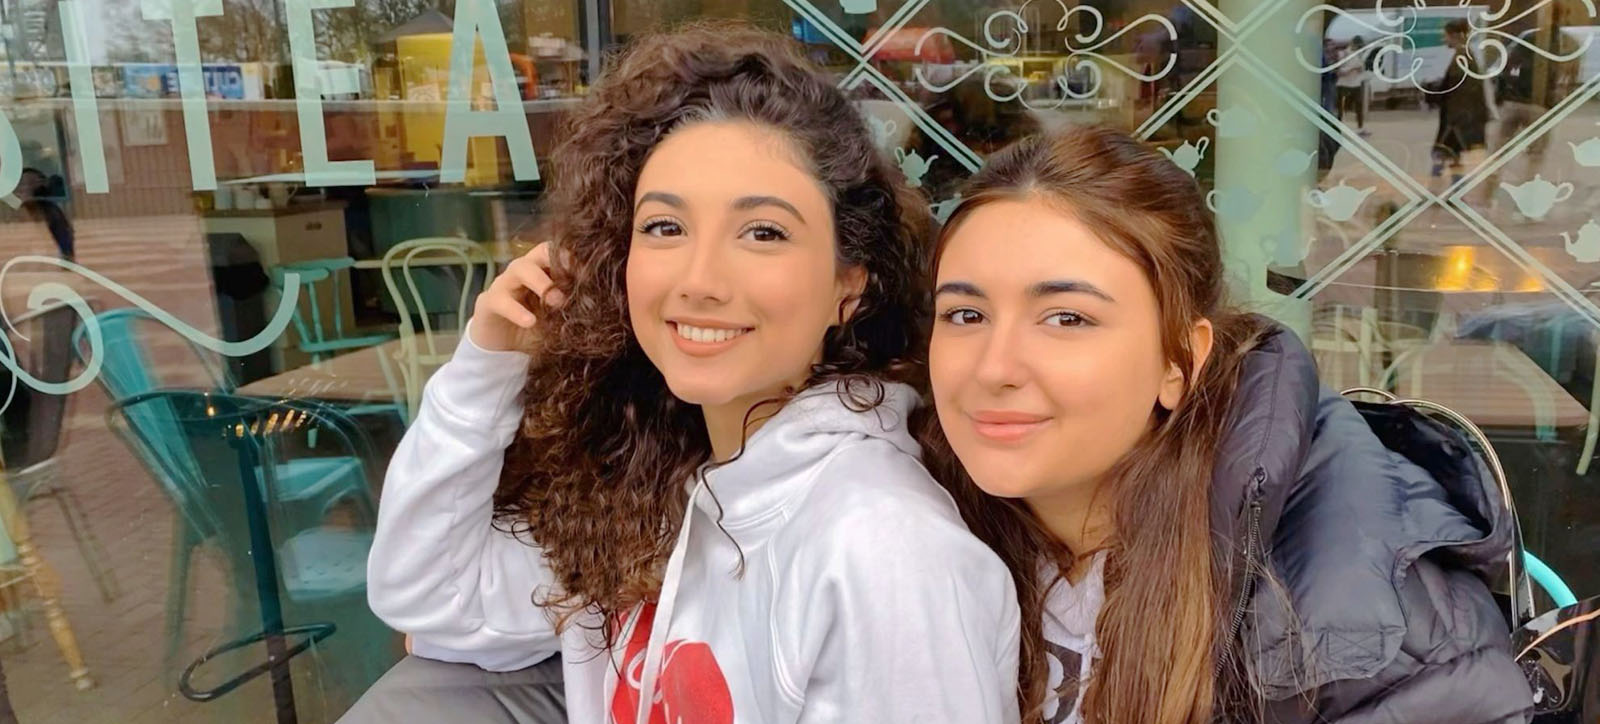 WBS students Nilufar Abasova and Leyli Aliyeva launched a charity harnessing social media to help people donate direct to struggling families